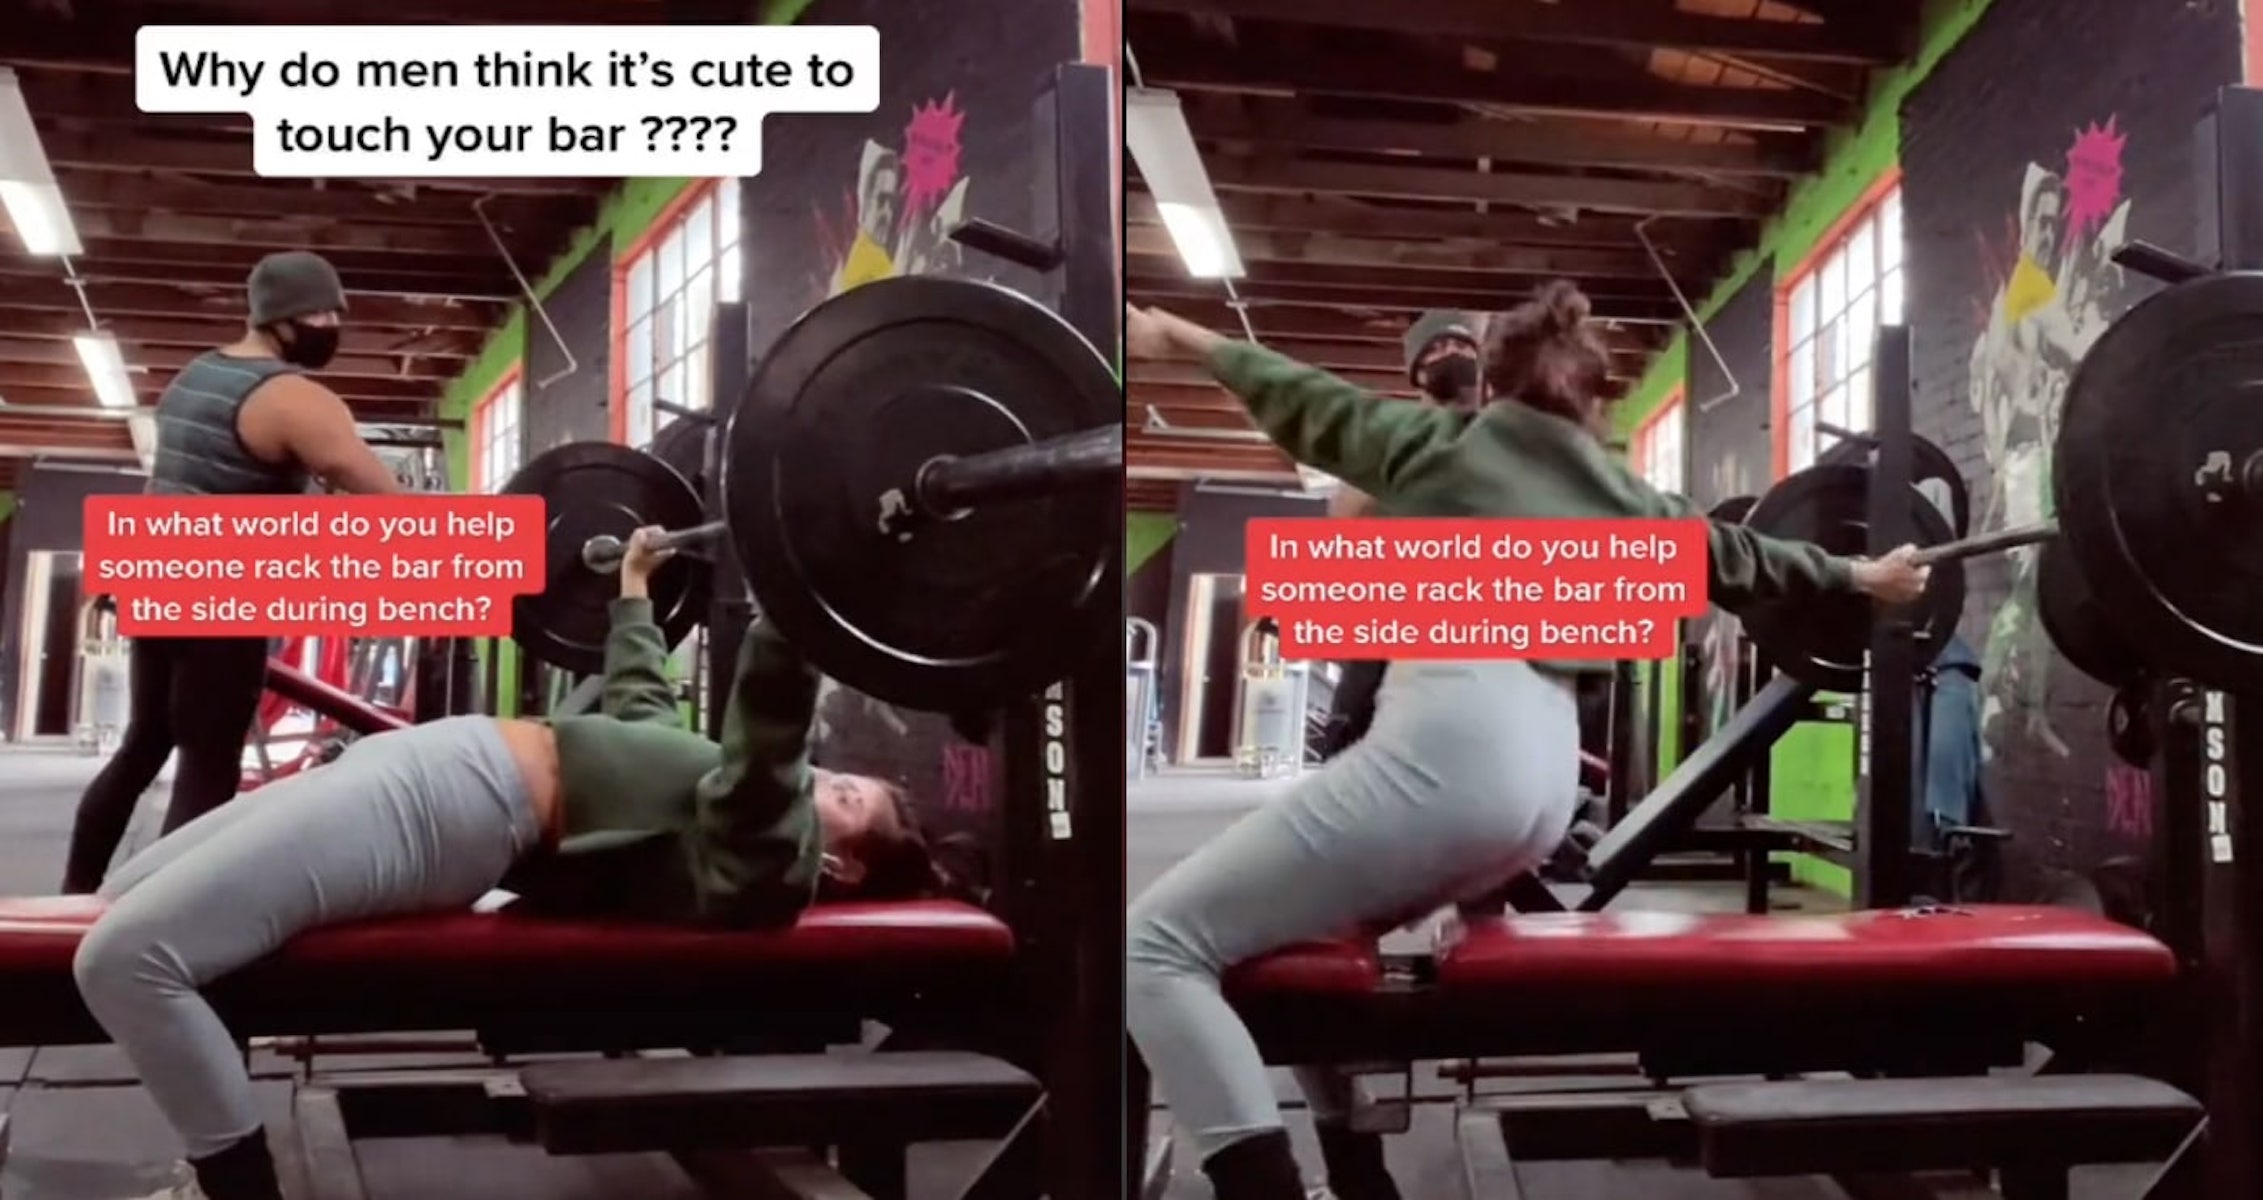 WATCH: TikTok Video Shows ‘Gym Creep’ Assisting Woman Without Consent